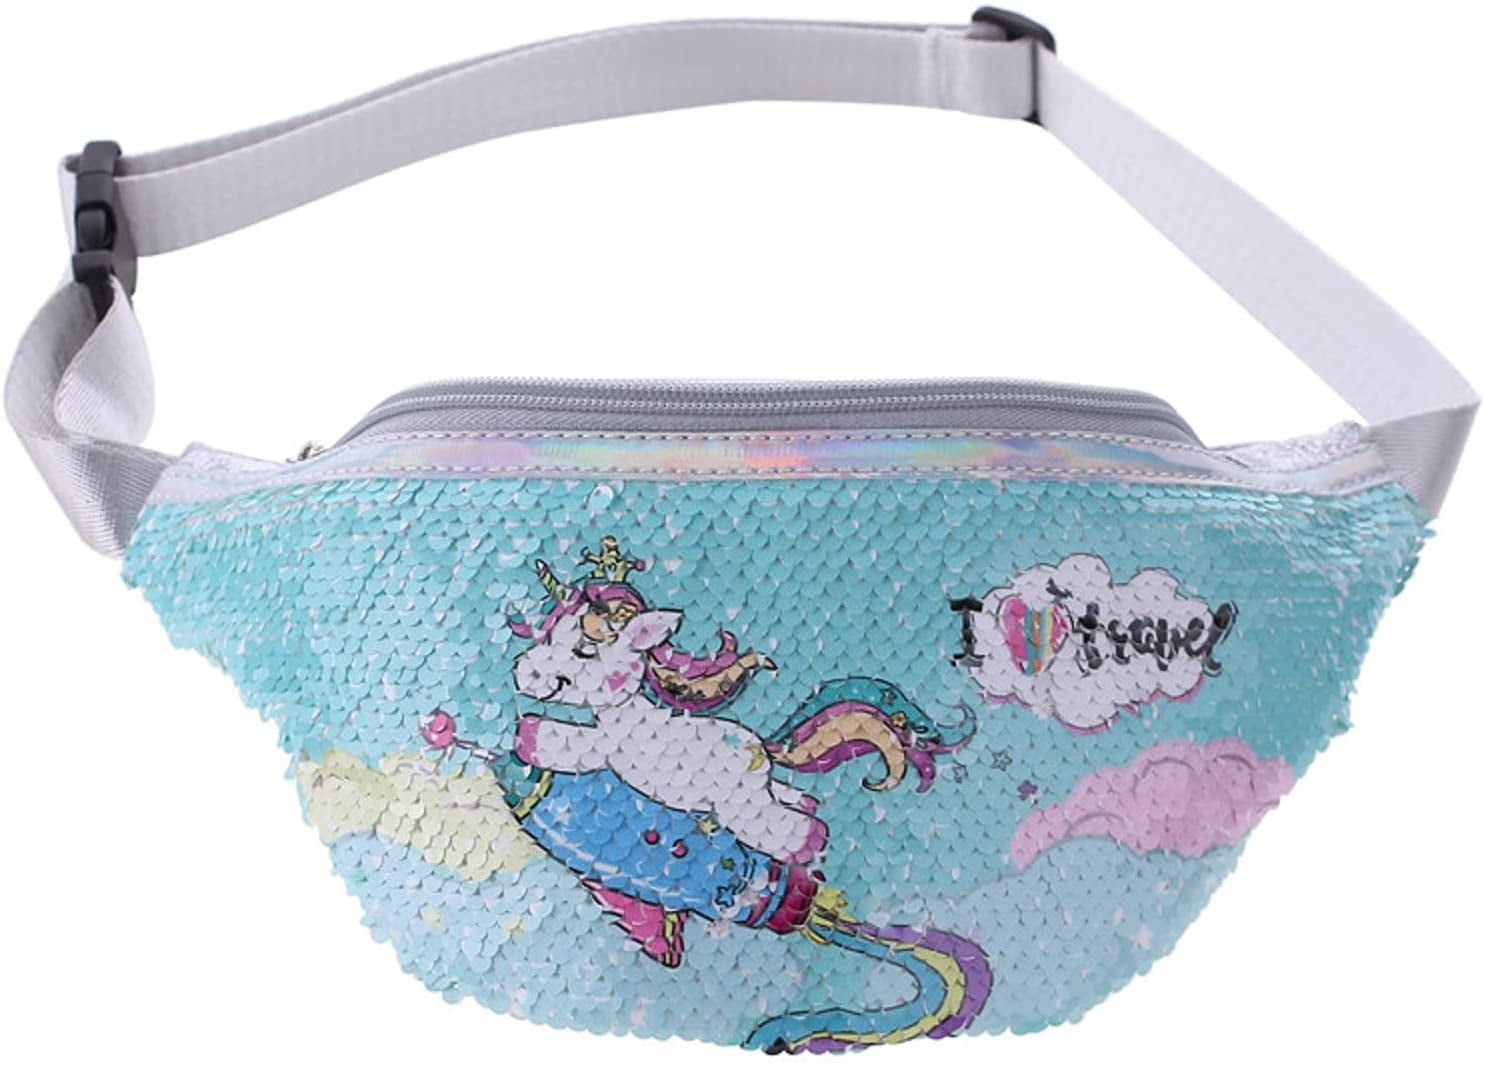 Sequined Bum Bag with Adjustable Belt Strap Blue Fabric Sequin Fanny Pack 